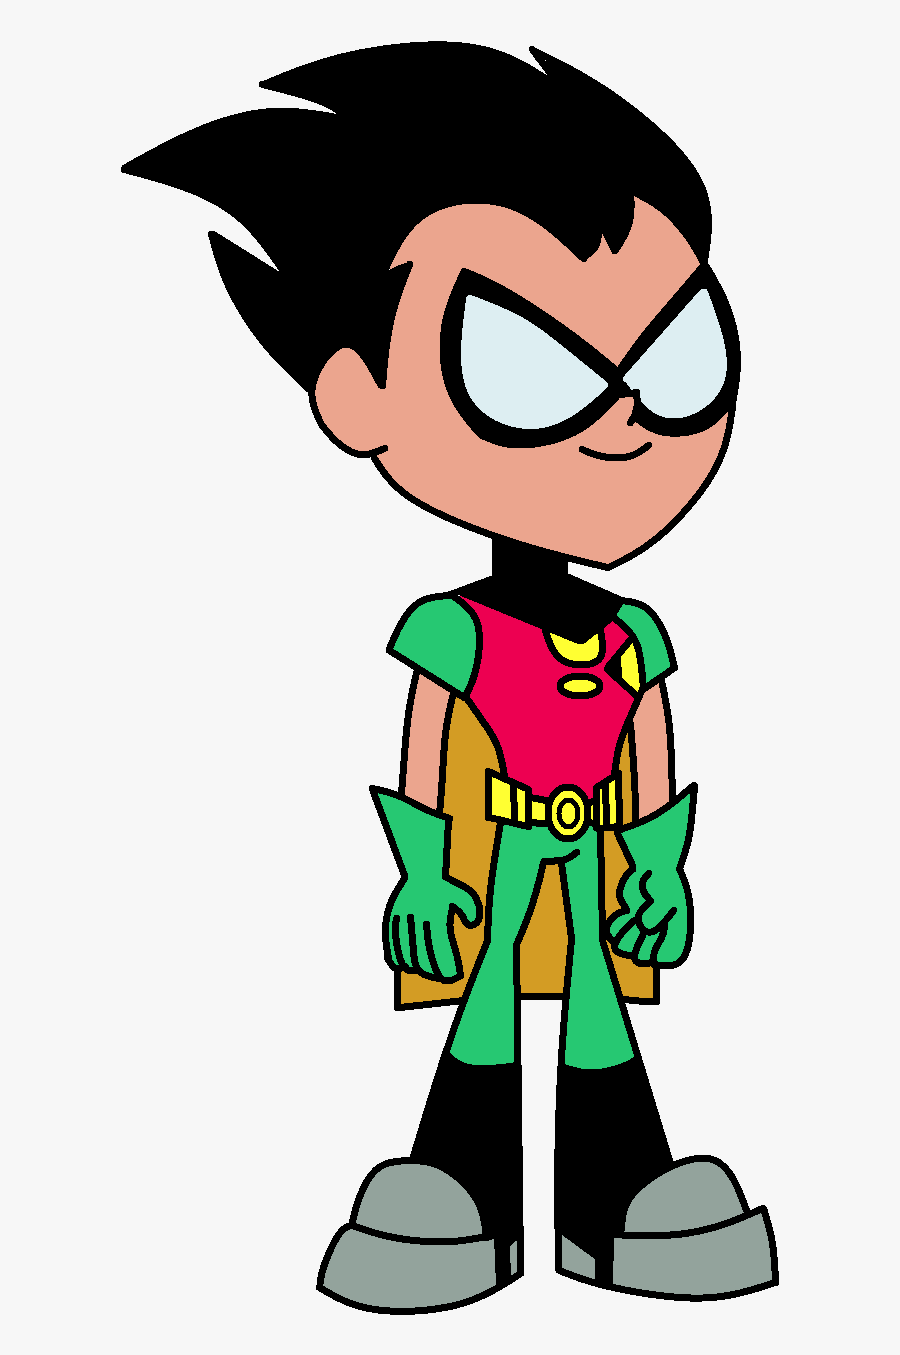 Robin - Draw Robin From Teen Titans Go, Transparent Clipart